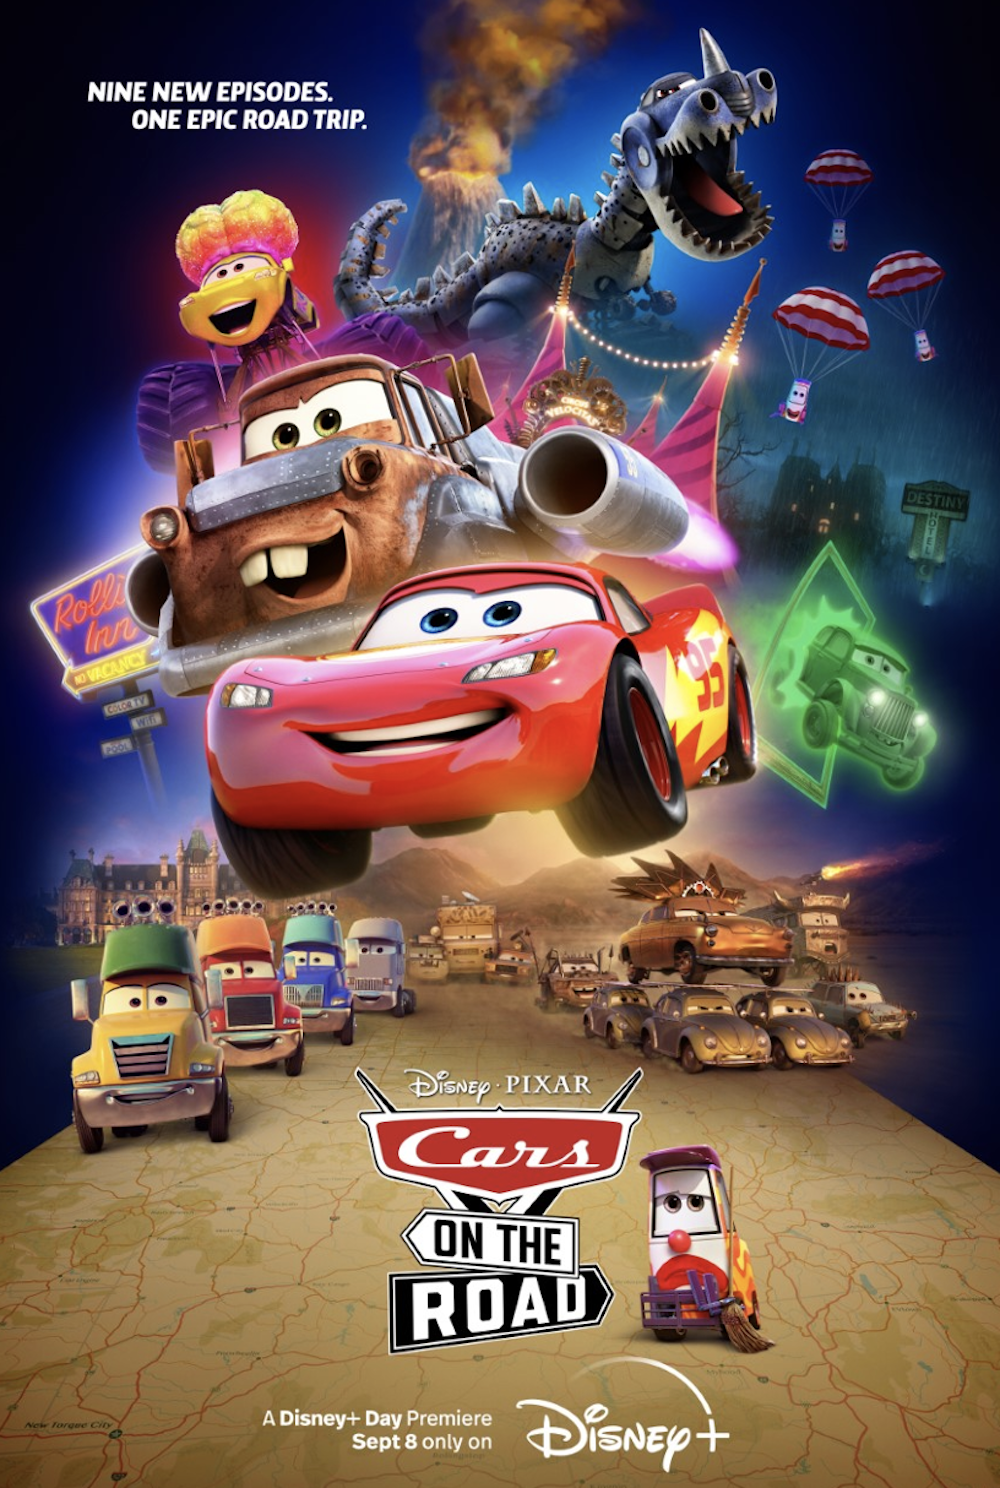 CARS ON THE ROAD POSTER